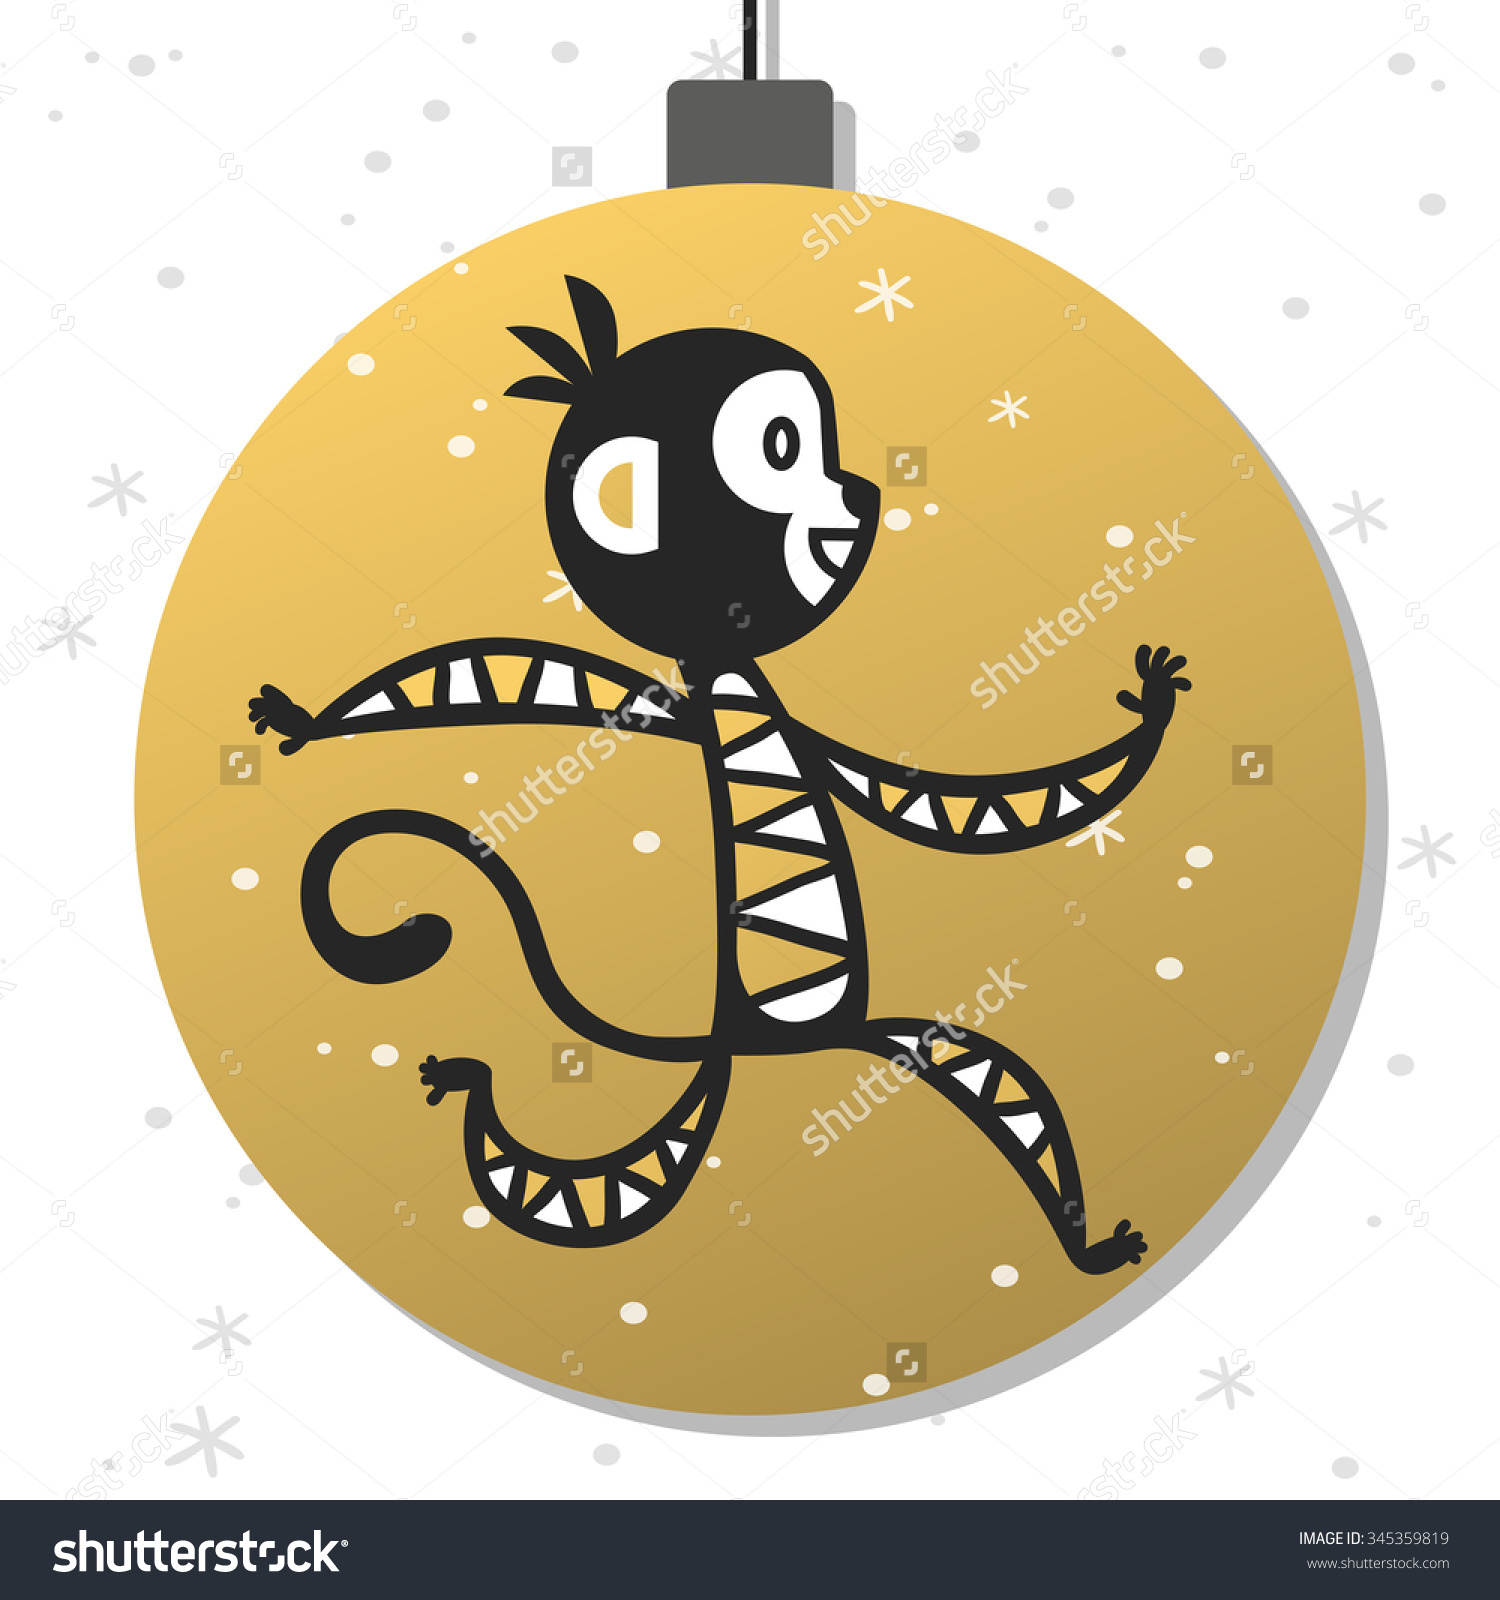 Chinese clipart monkey. Icon new year